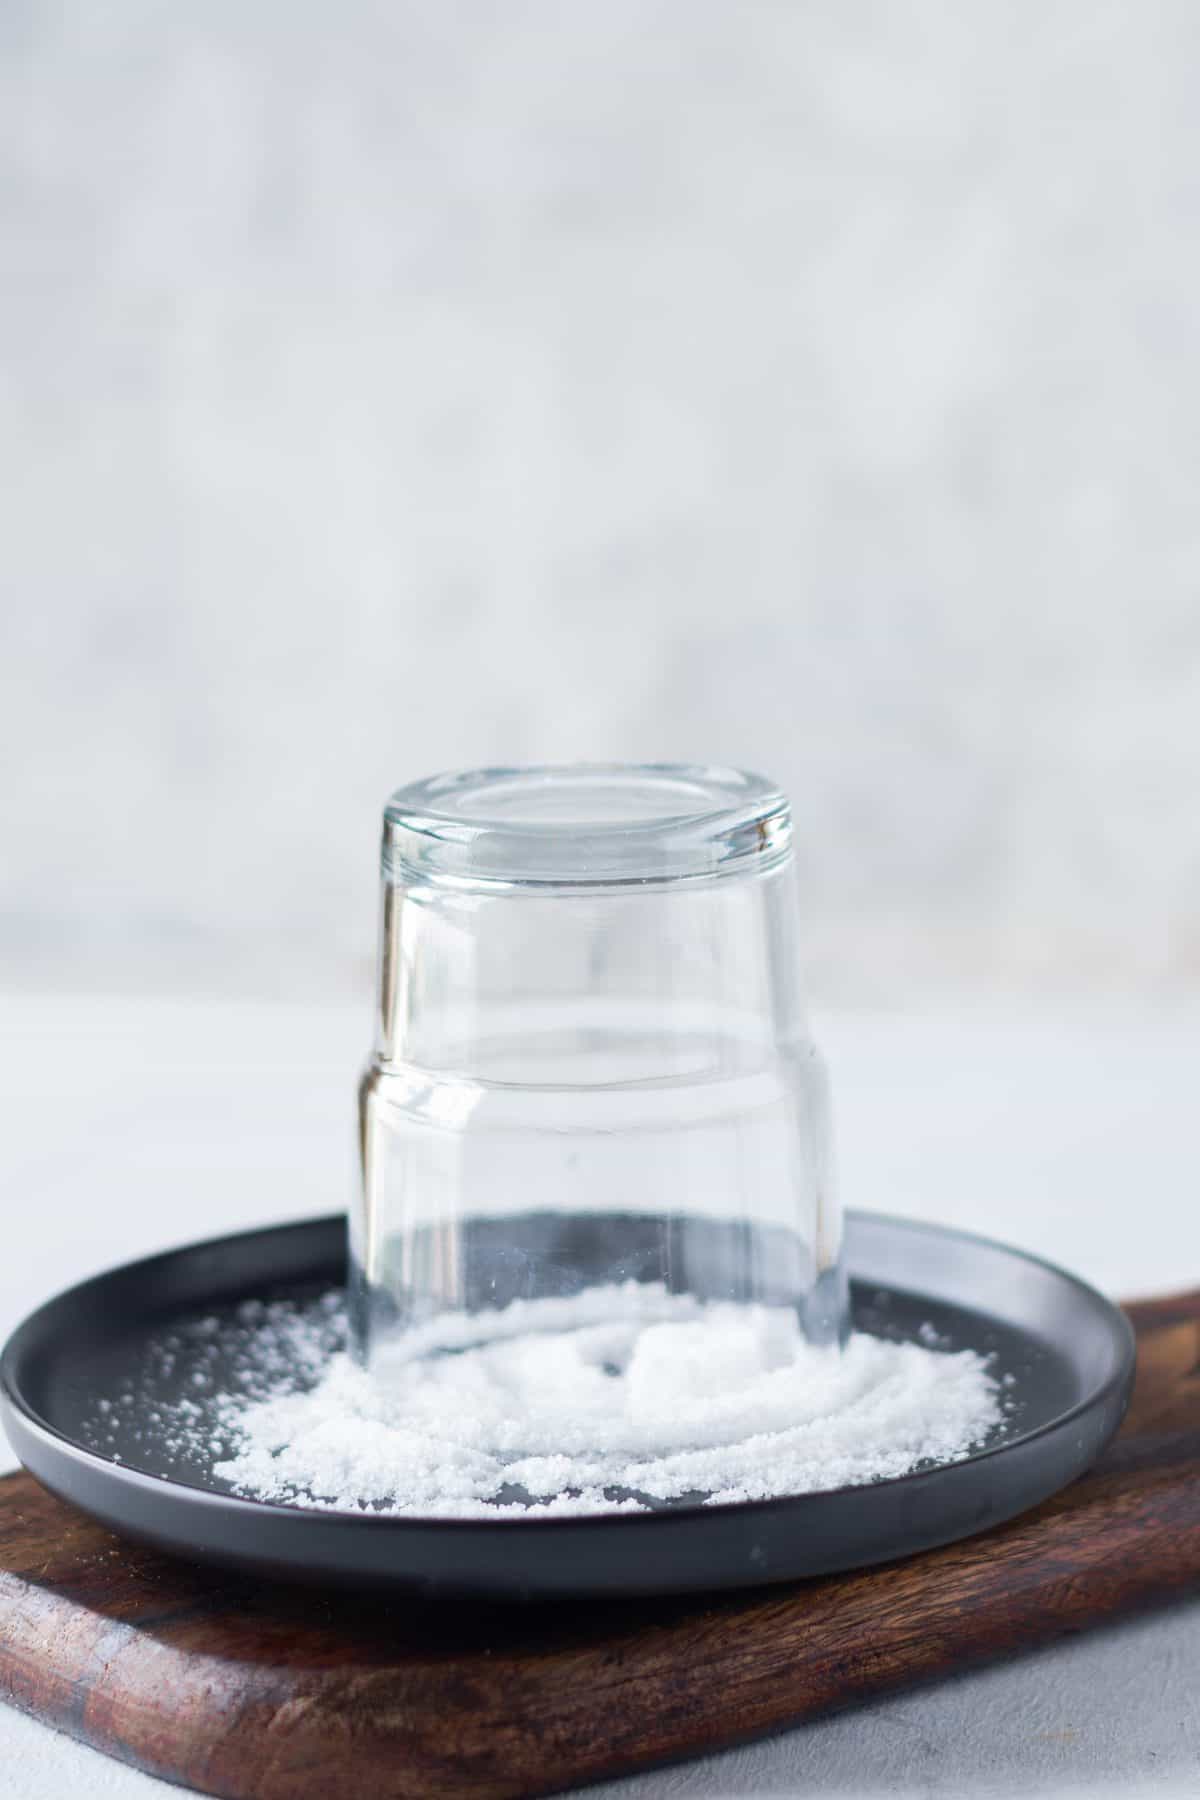 dipping the rim of glass into a plate of salt for margaritas.